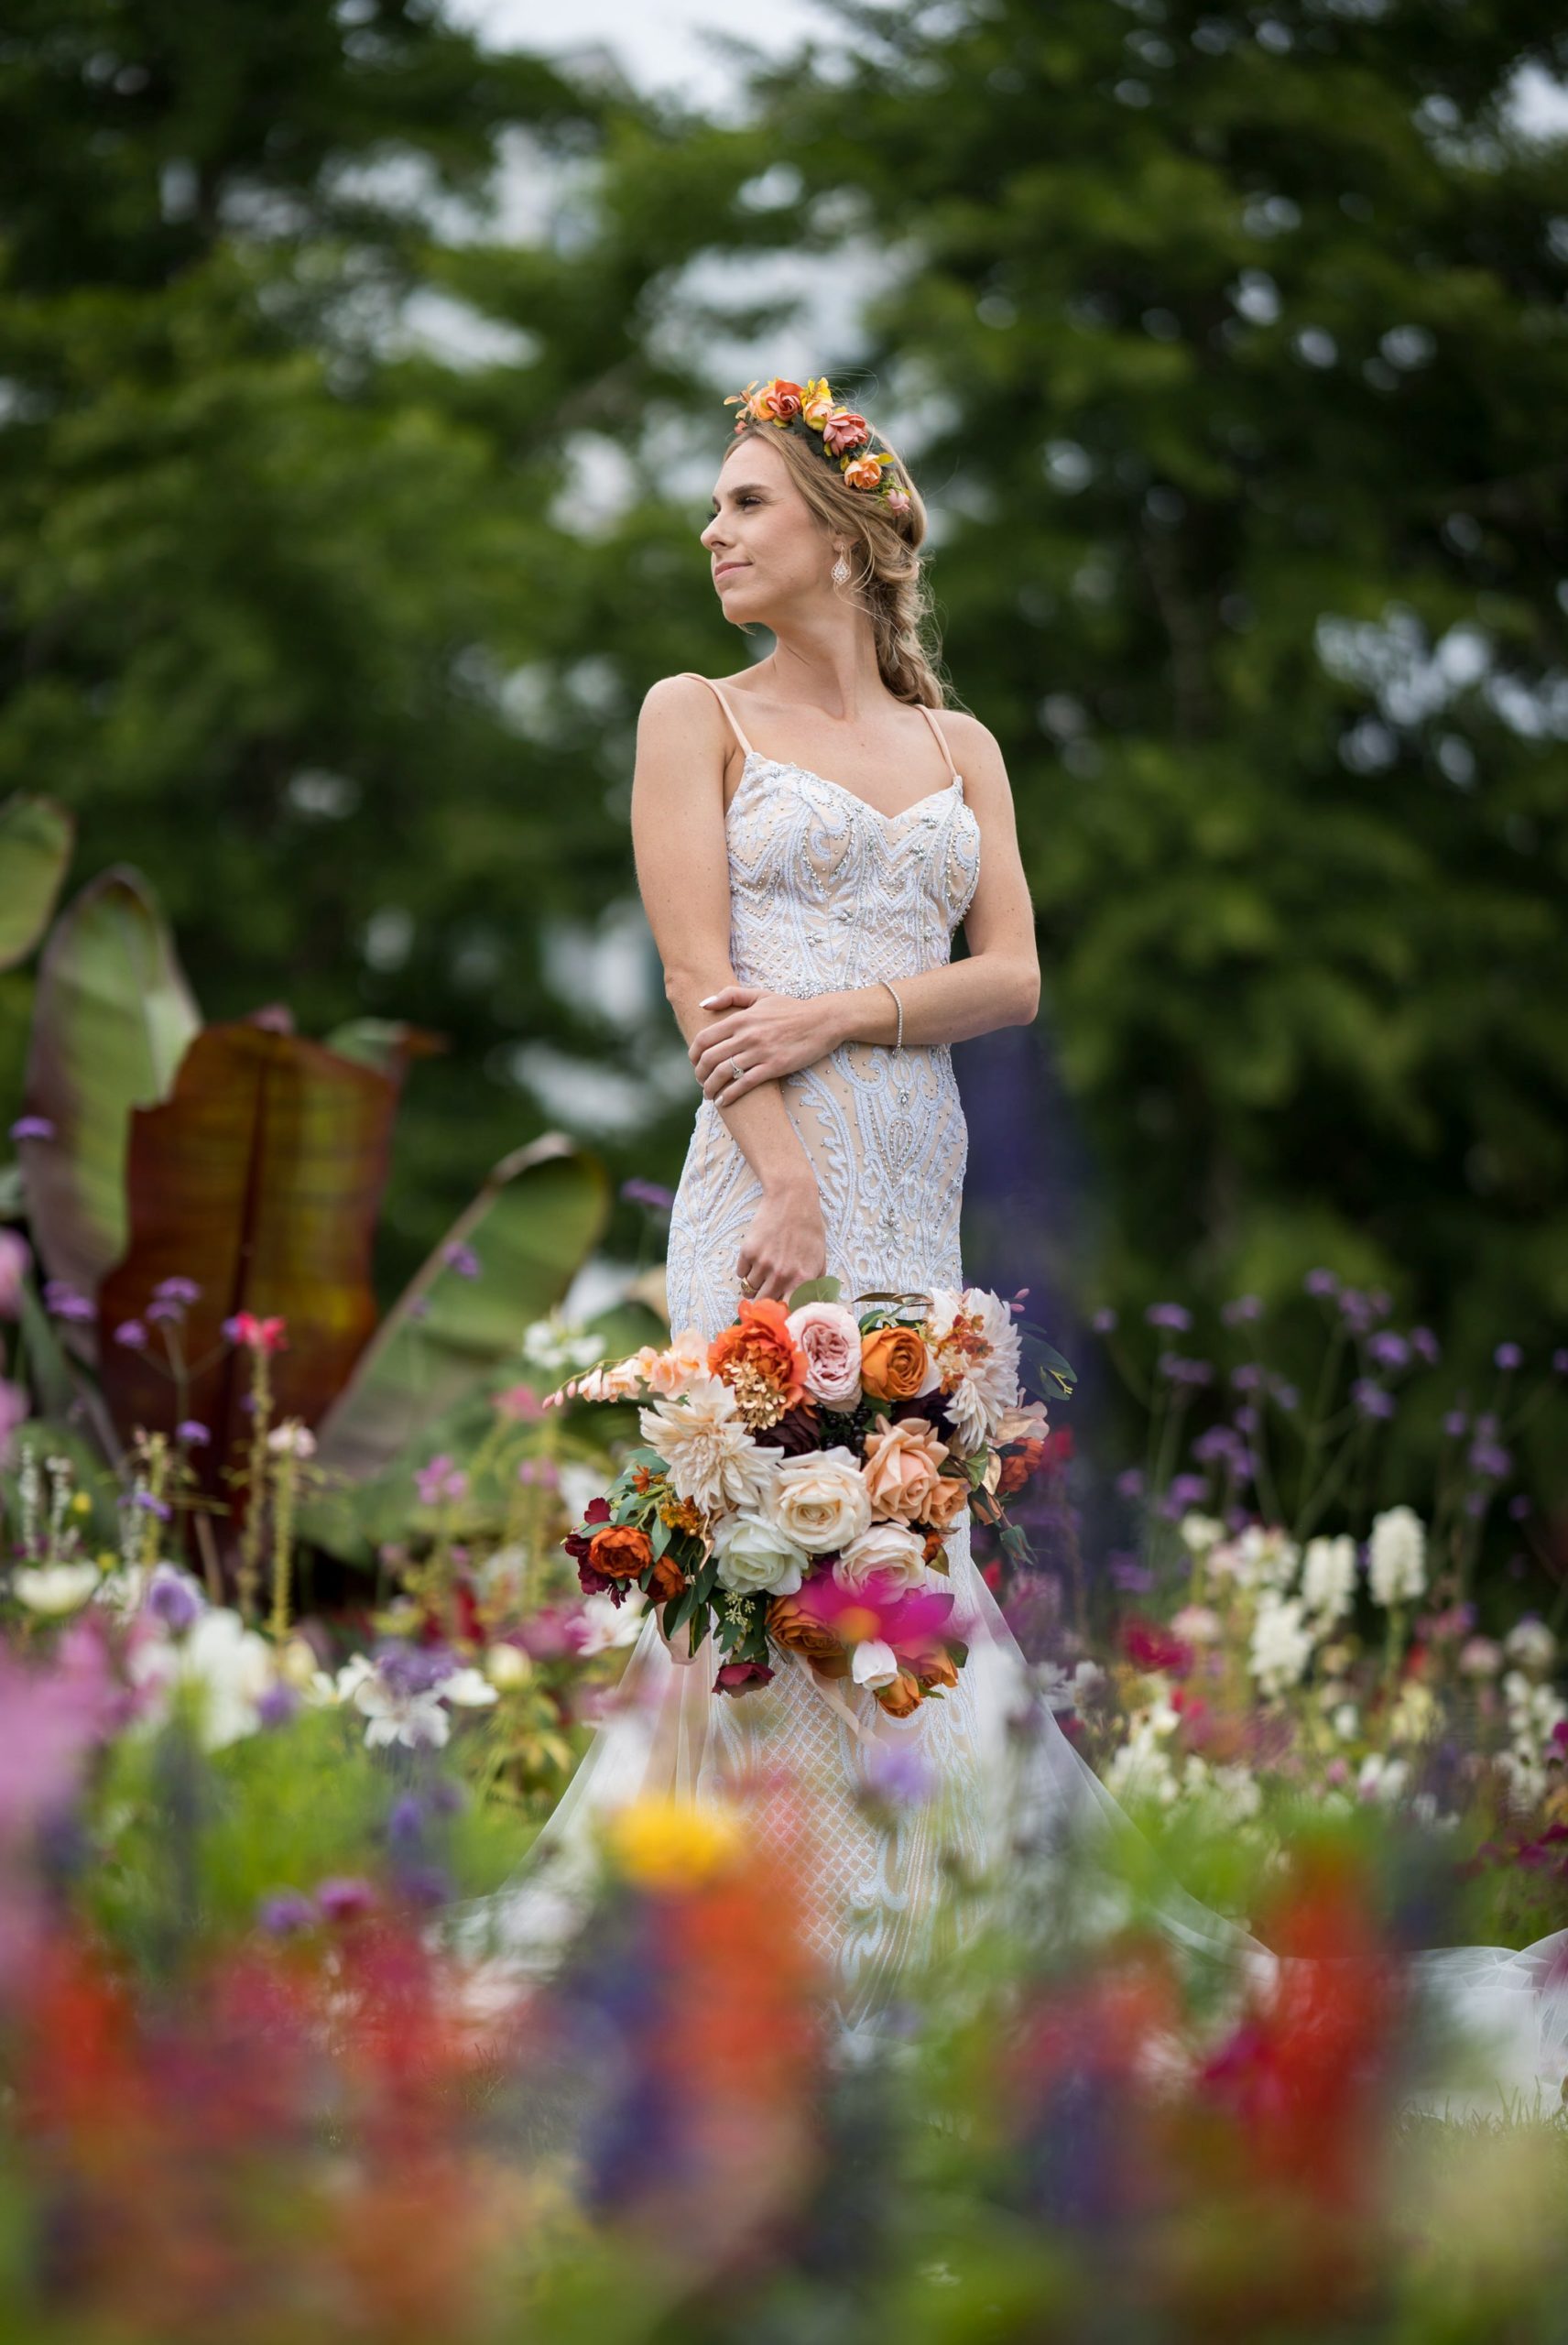 A bride poses with her bouquet in the gardens of the Grand Hotel on Mackinac Island.   